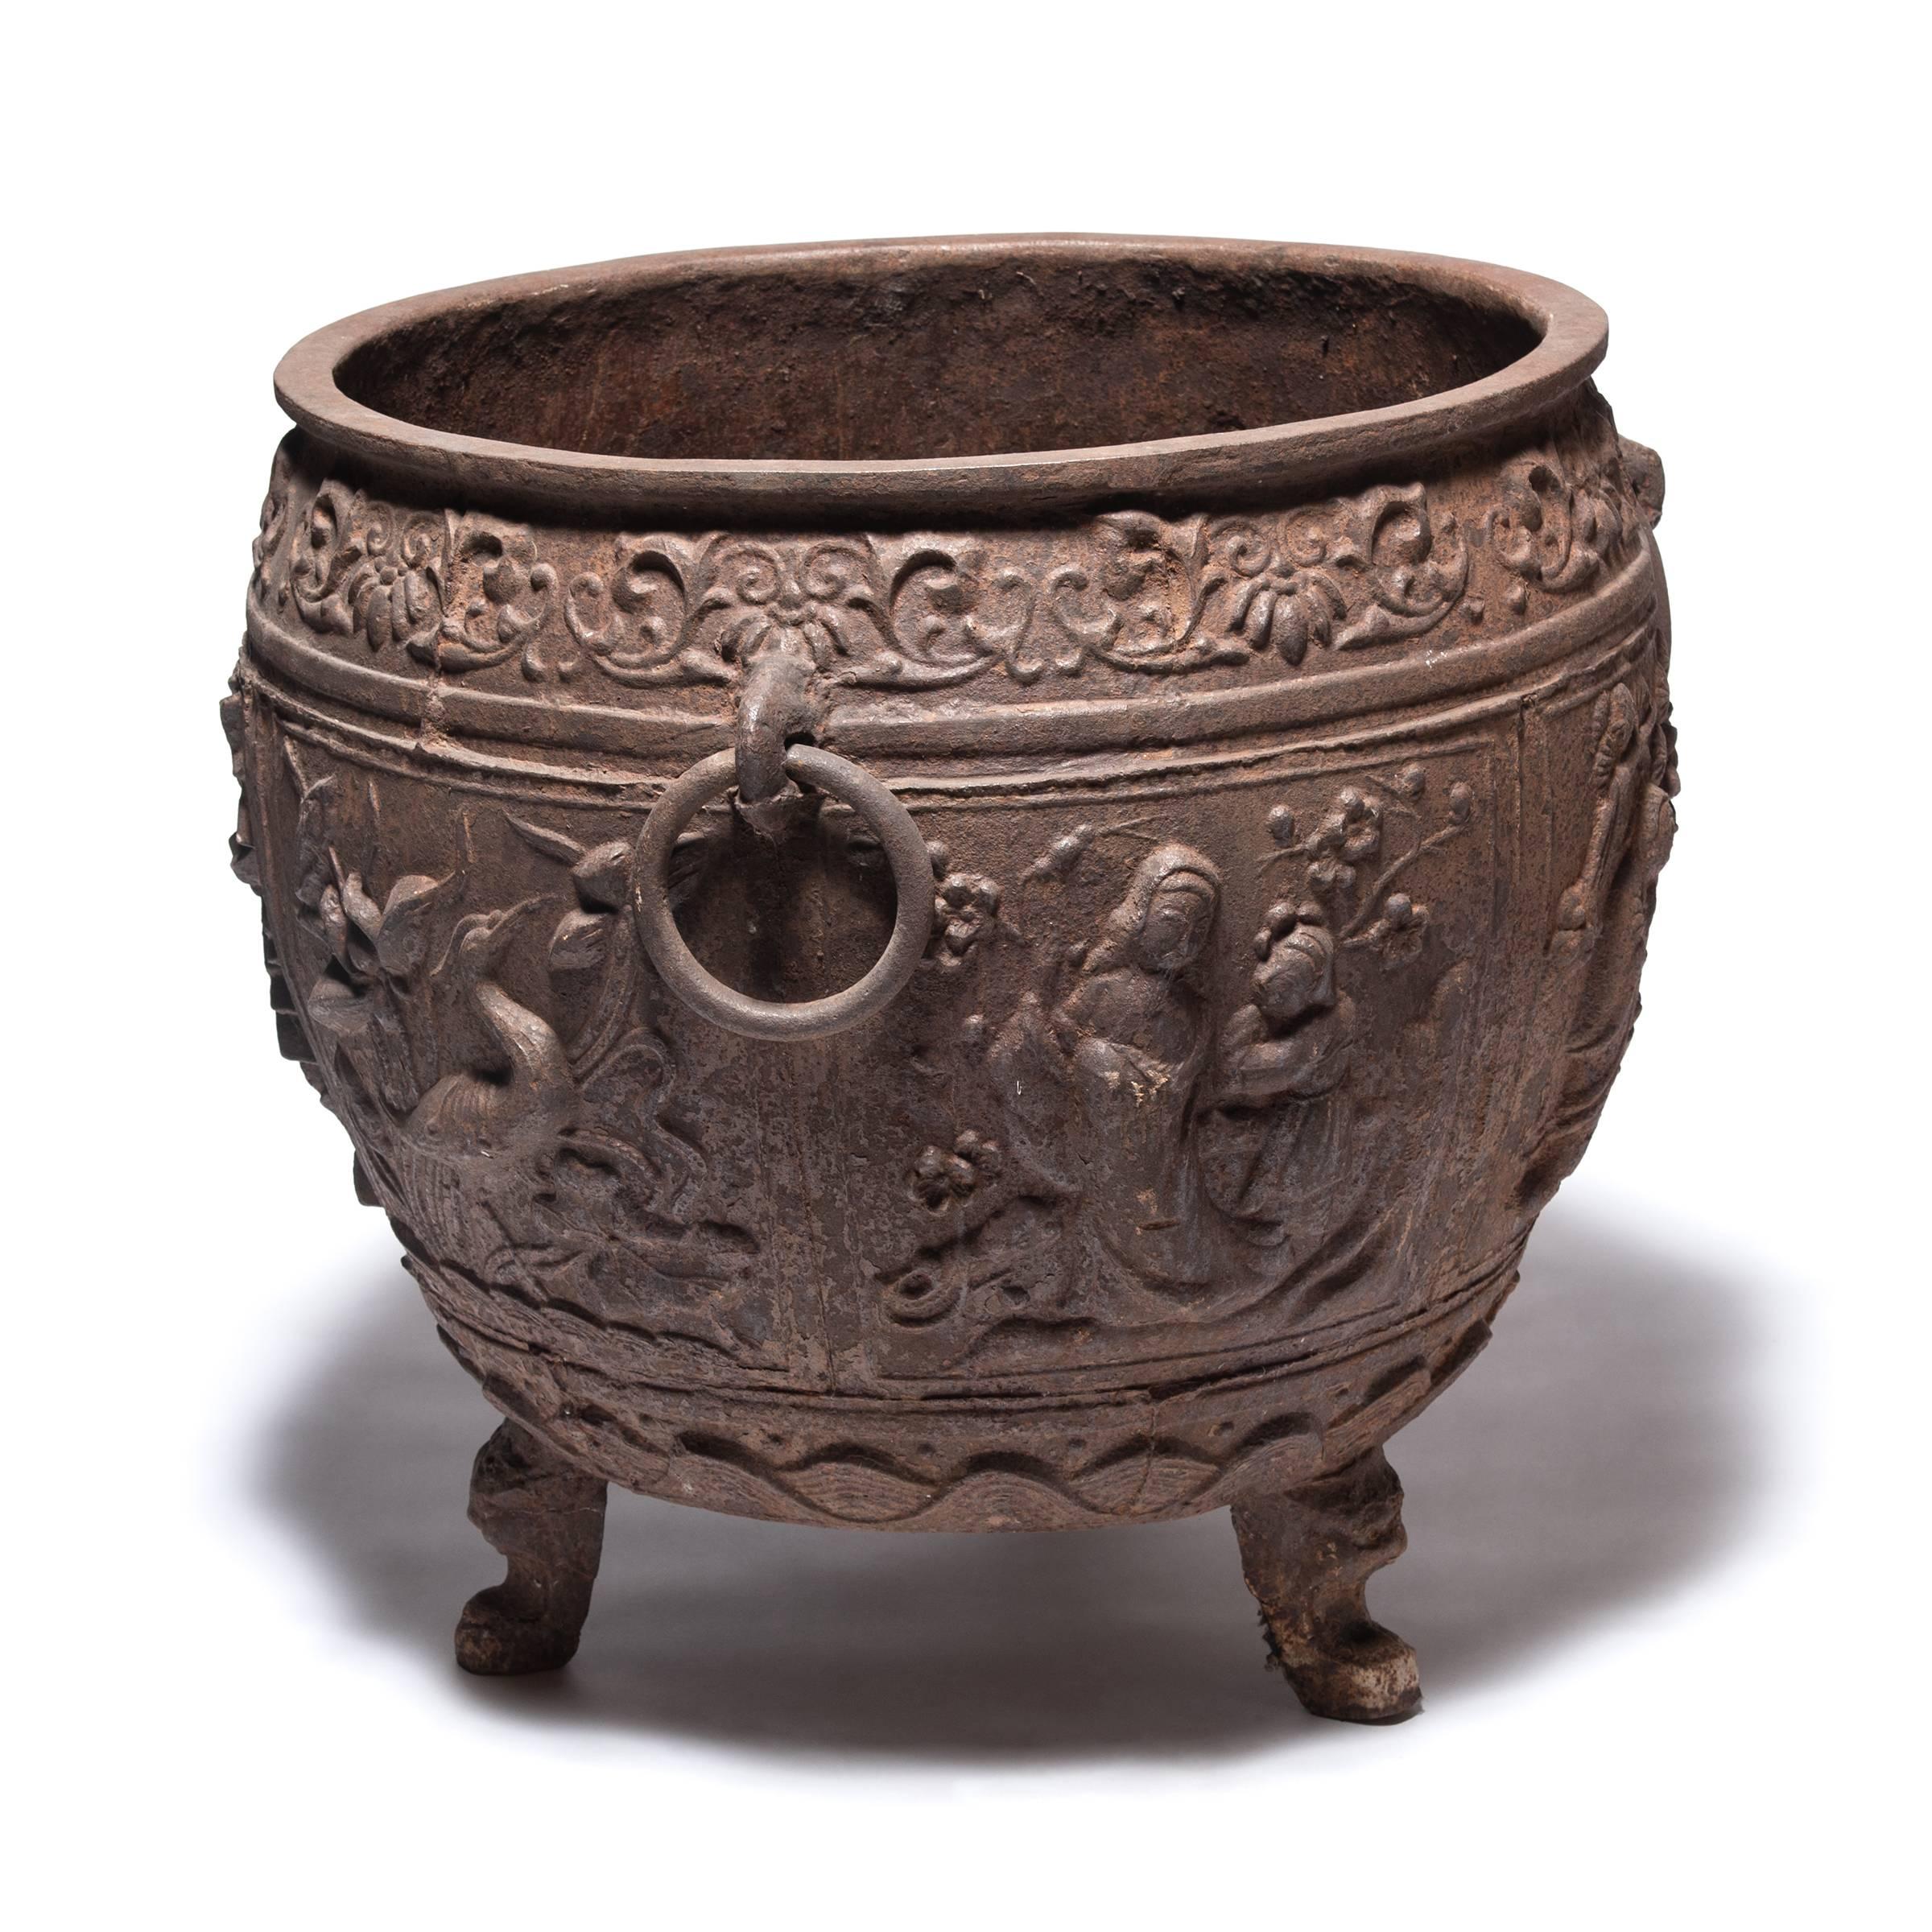 China was the earliest known civilizations to work with cast iron, first appearing thousands of years ago during the illustrious Zhou dynasty. Continuing the time-honored craft of metalwork, this contemporary urn references 19th-century vessels that